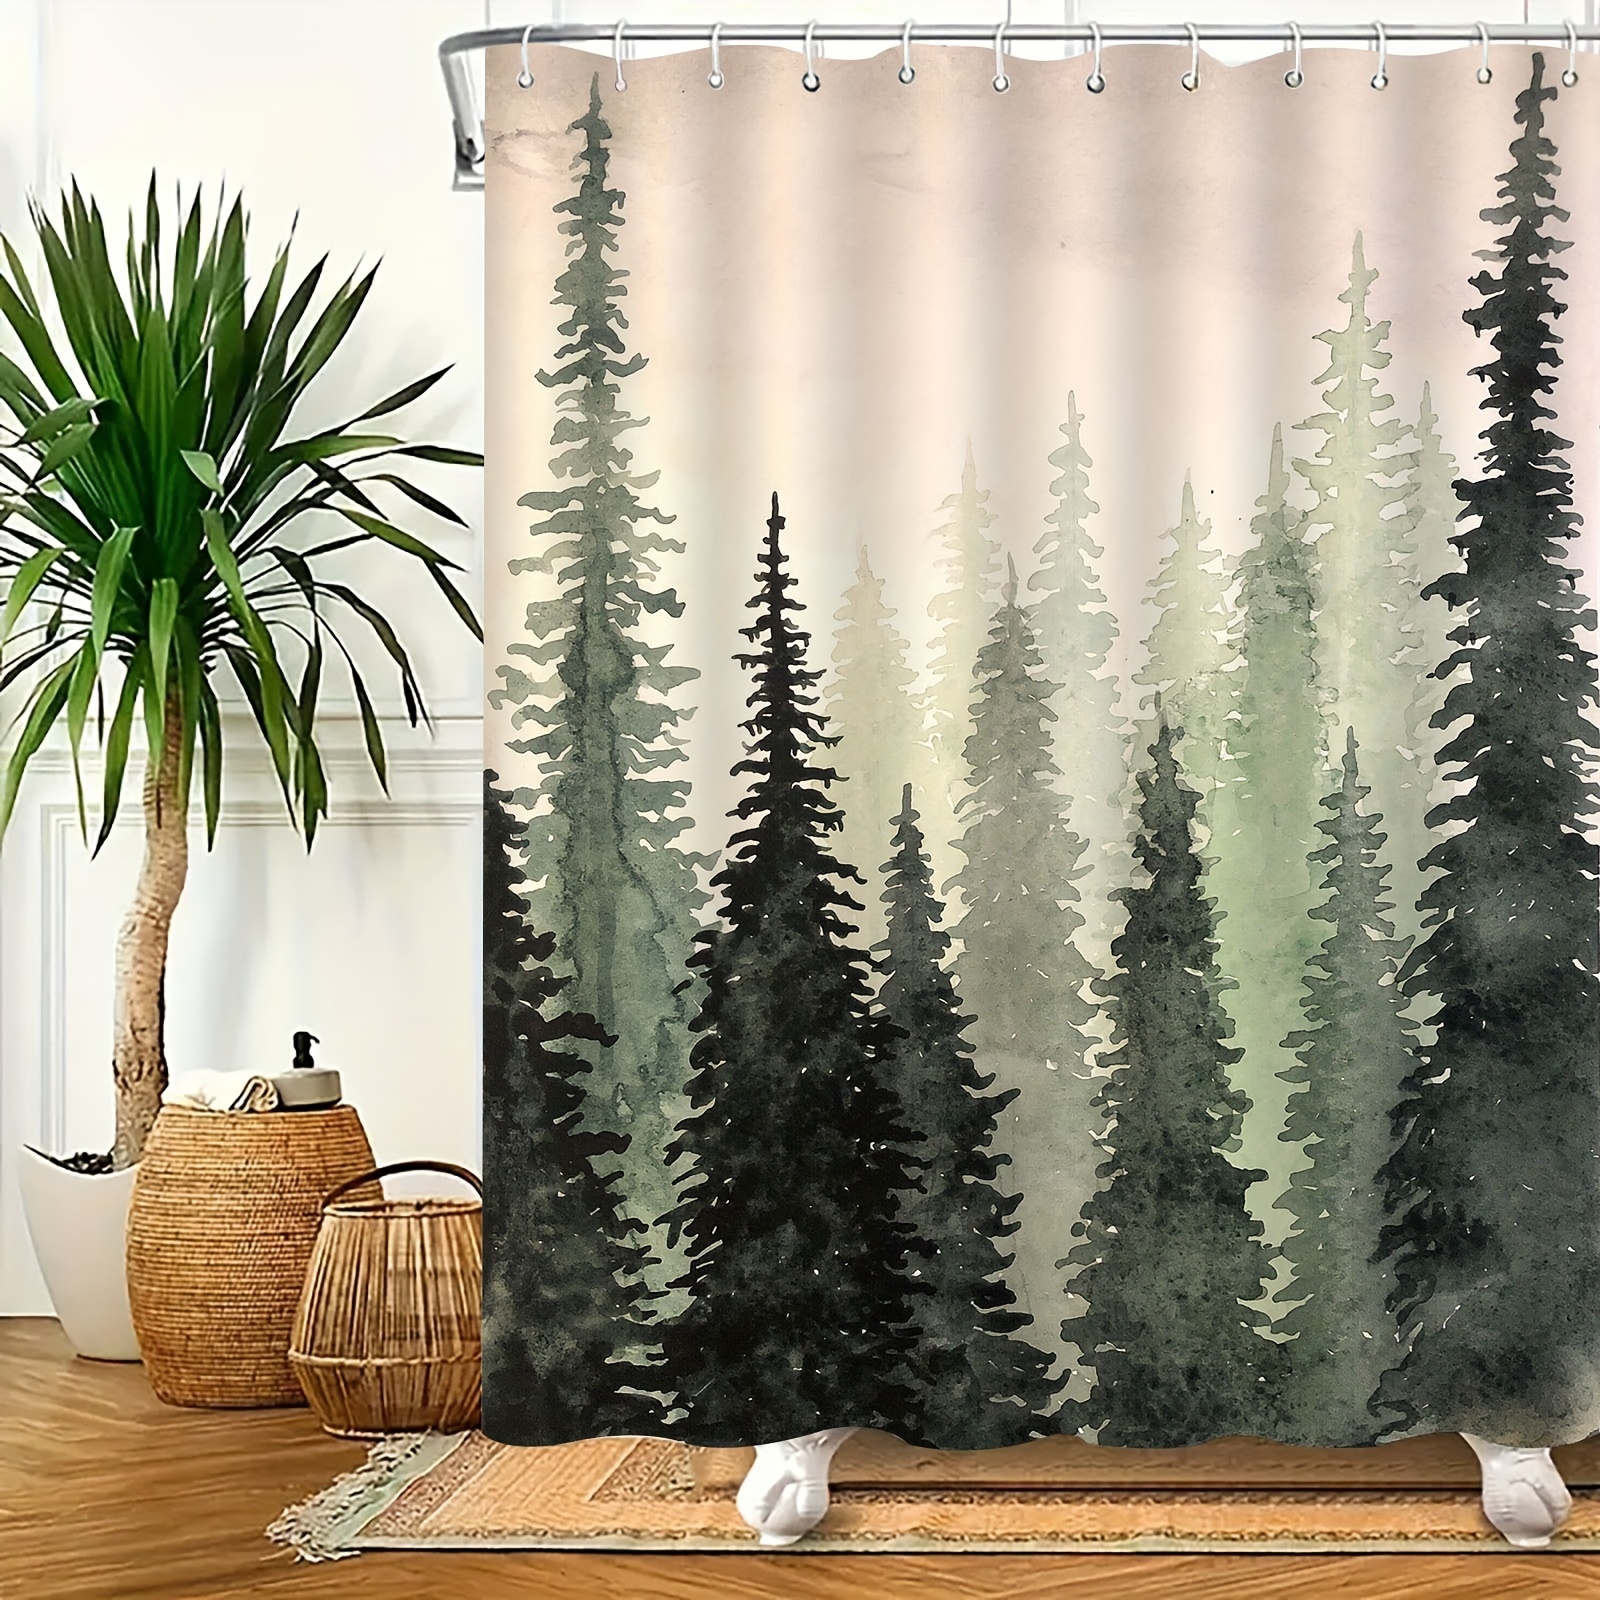 

Water-resistant Polyester Shower Curtain Set With Tree Pattern, Machine Washable, Mildew-proof Bathroom Decor With Grommets, Includes 12 Hooks, Knit Fabric Bath Partition For Home Decor